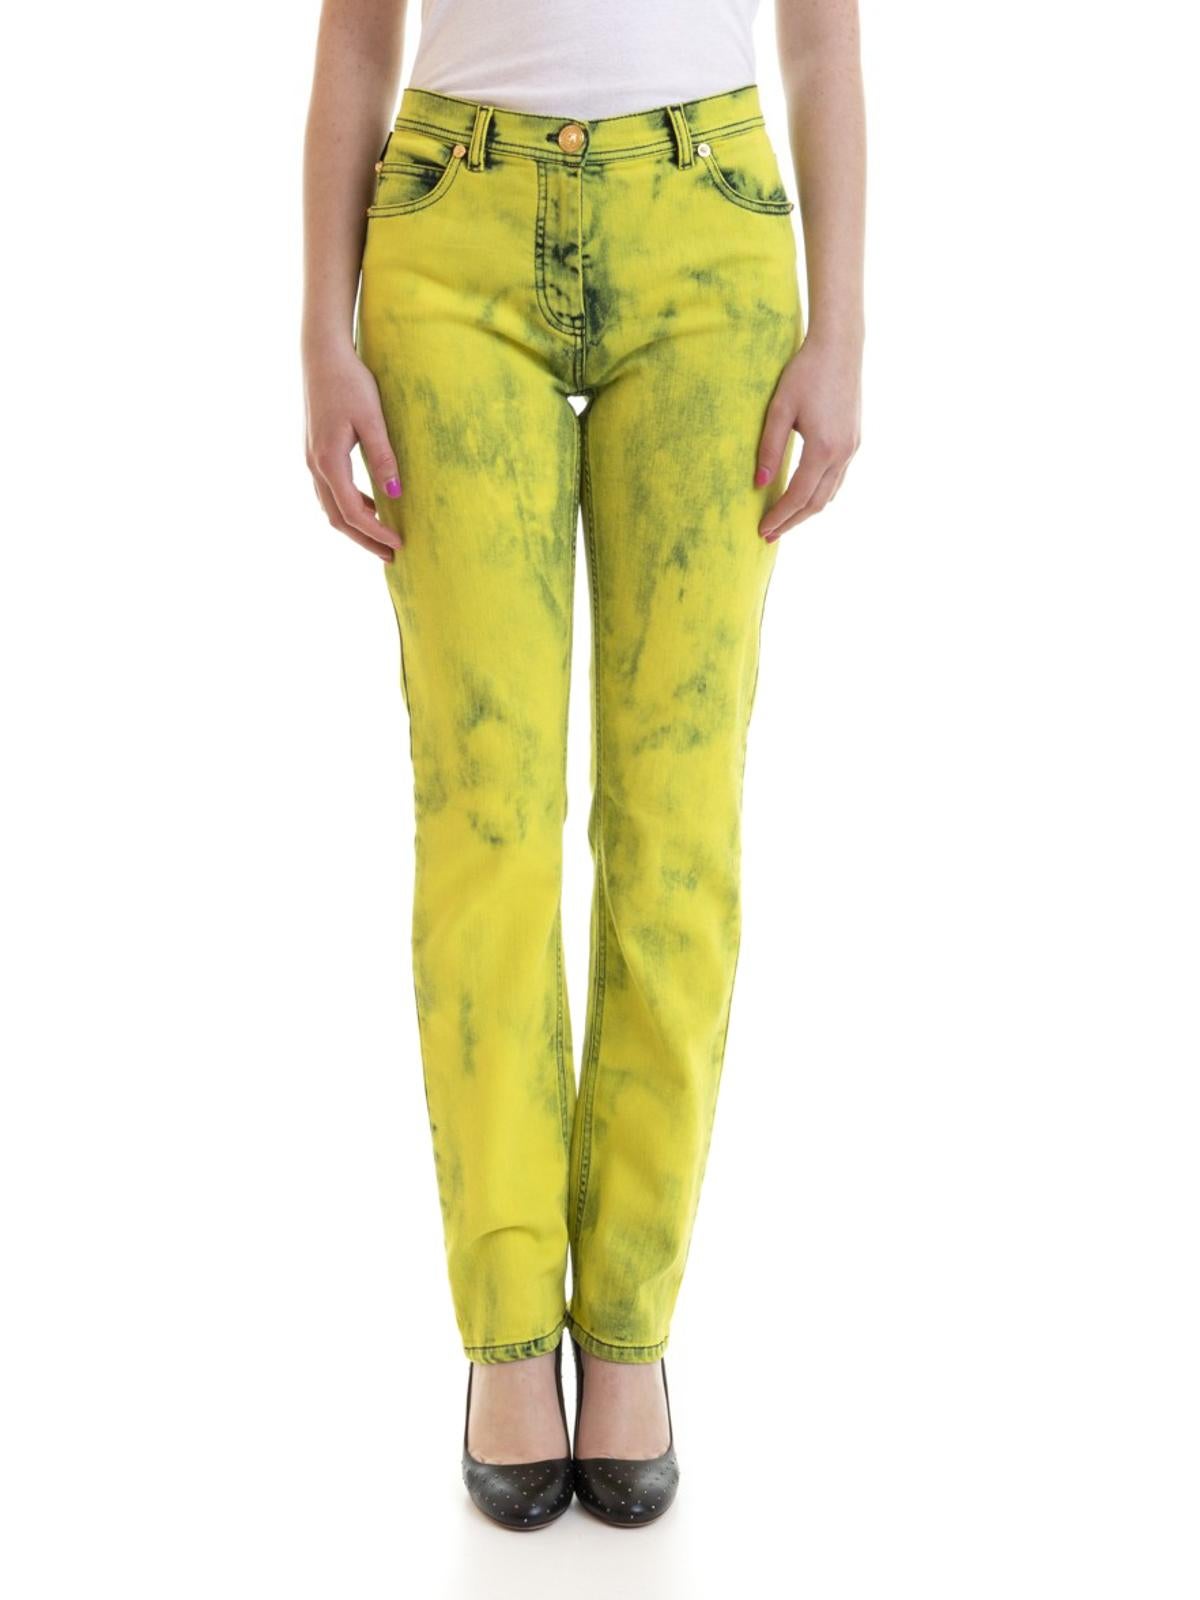 Women's Versace Yellow Acid Wash Denim Skinny Jeans with Logo Label Size 29 For Sale